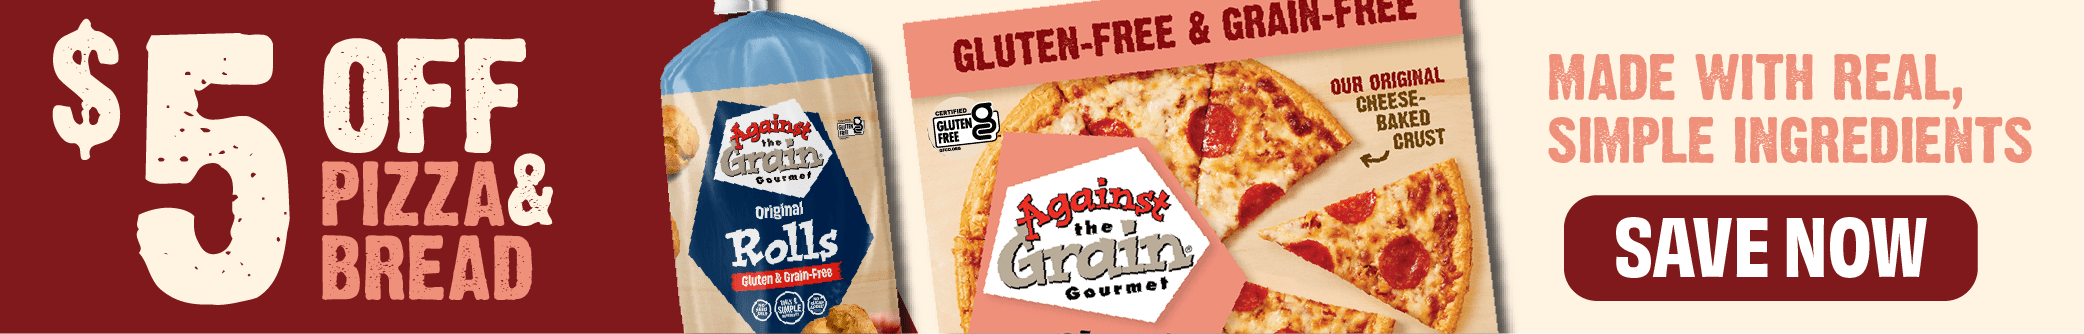 An add for Against the Grain gluten-free pizza. Reads, "$5 off pizza and bread. Made with real, simple ingredients. Save now."